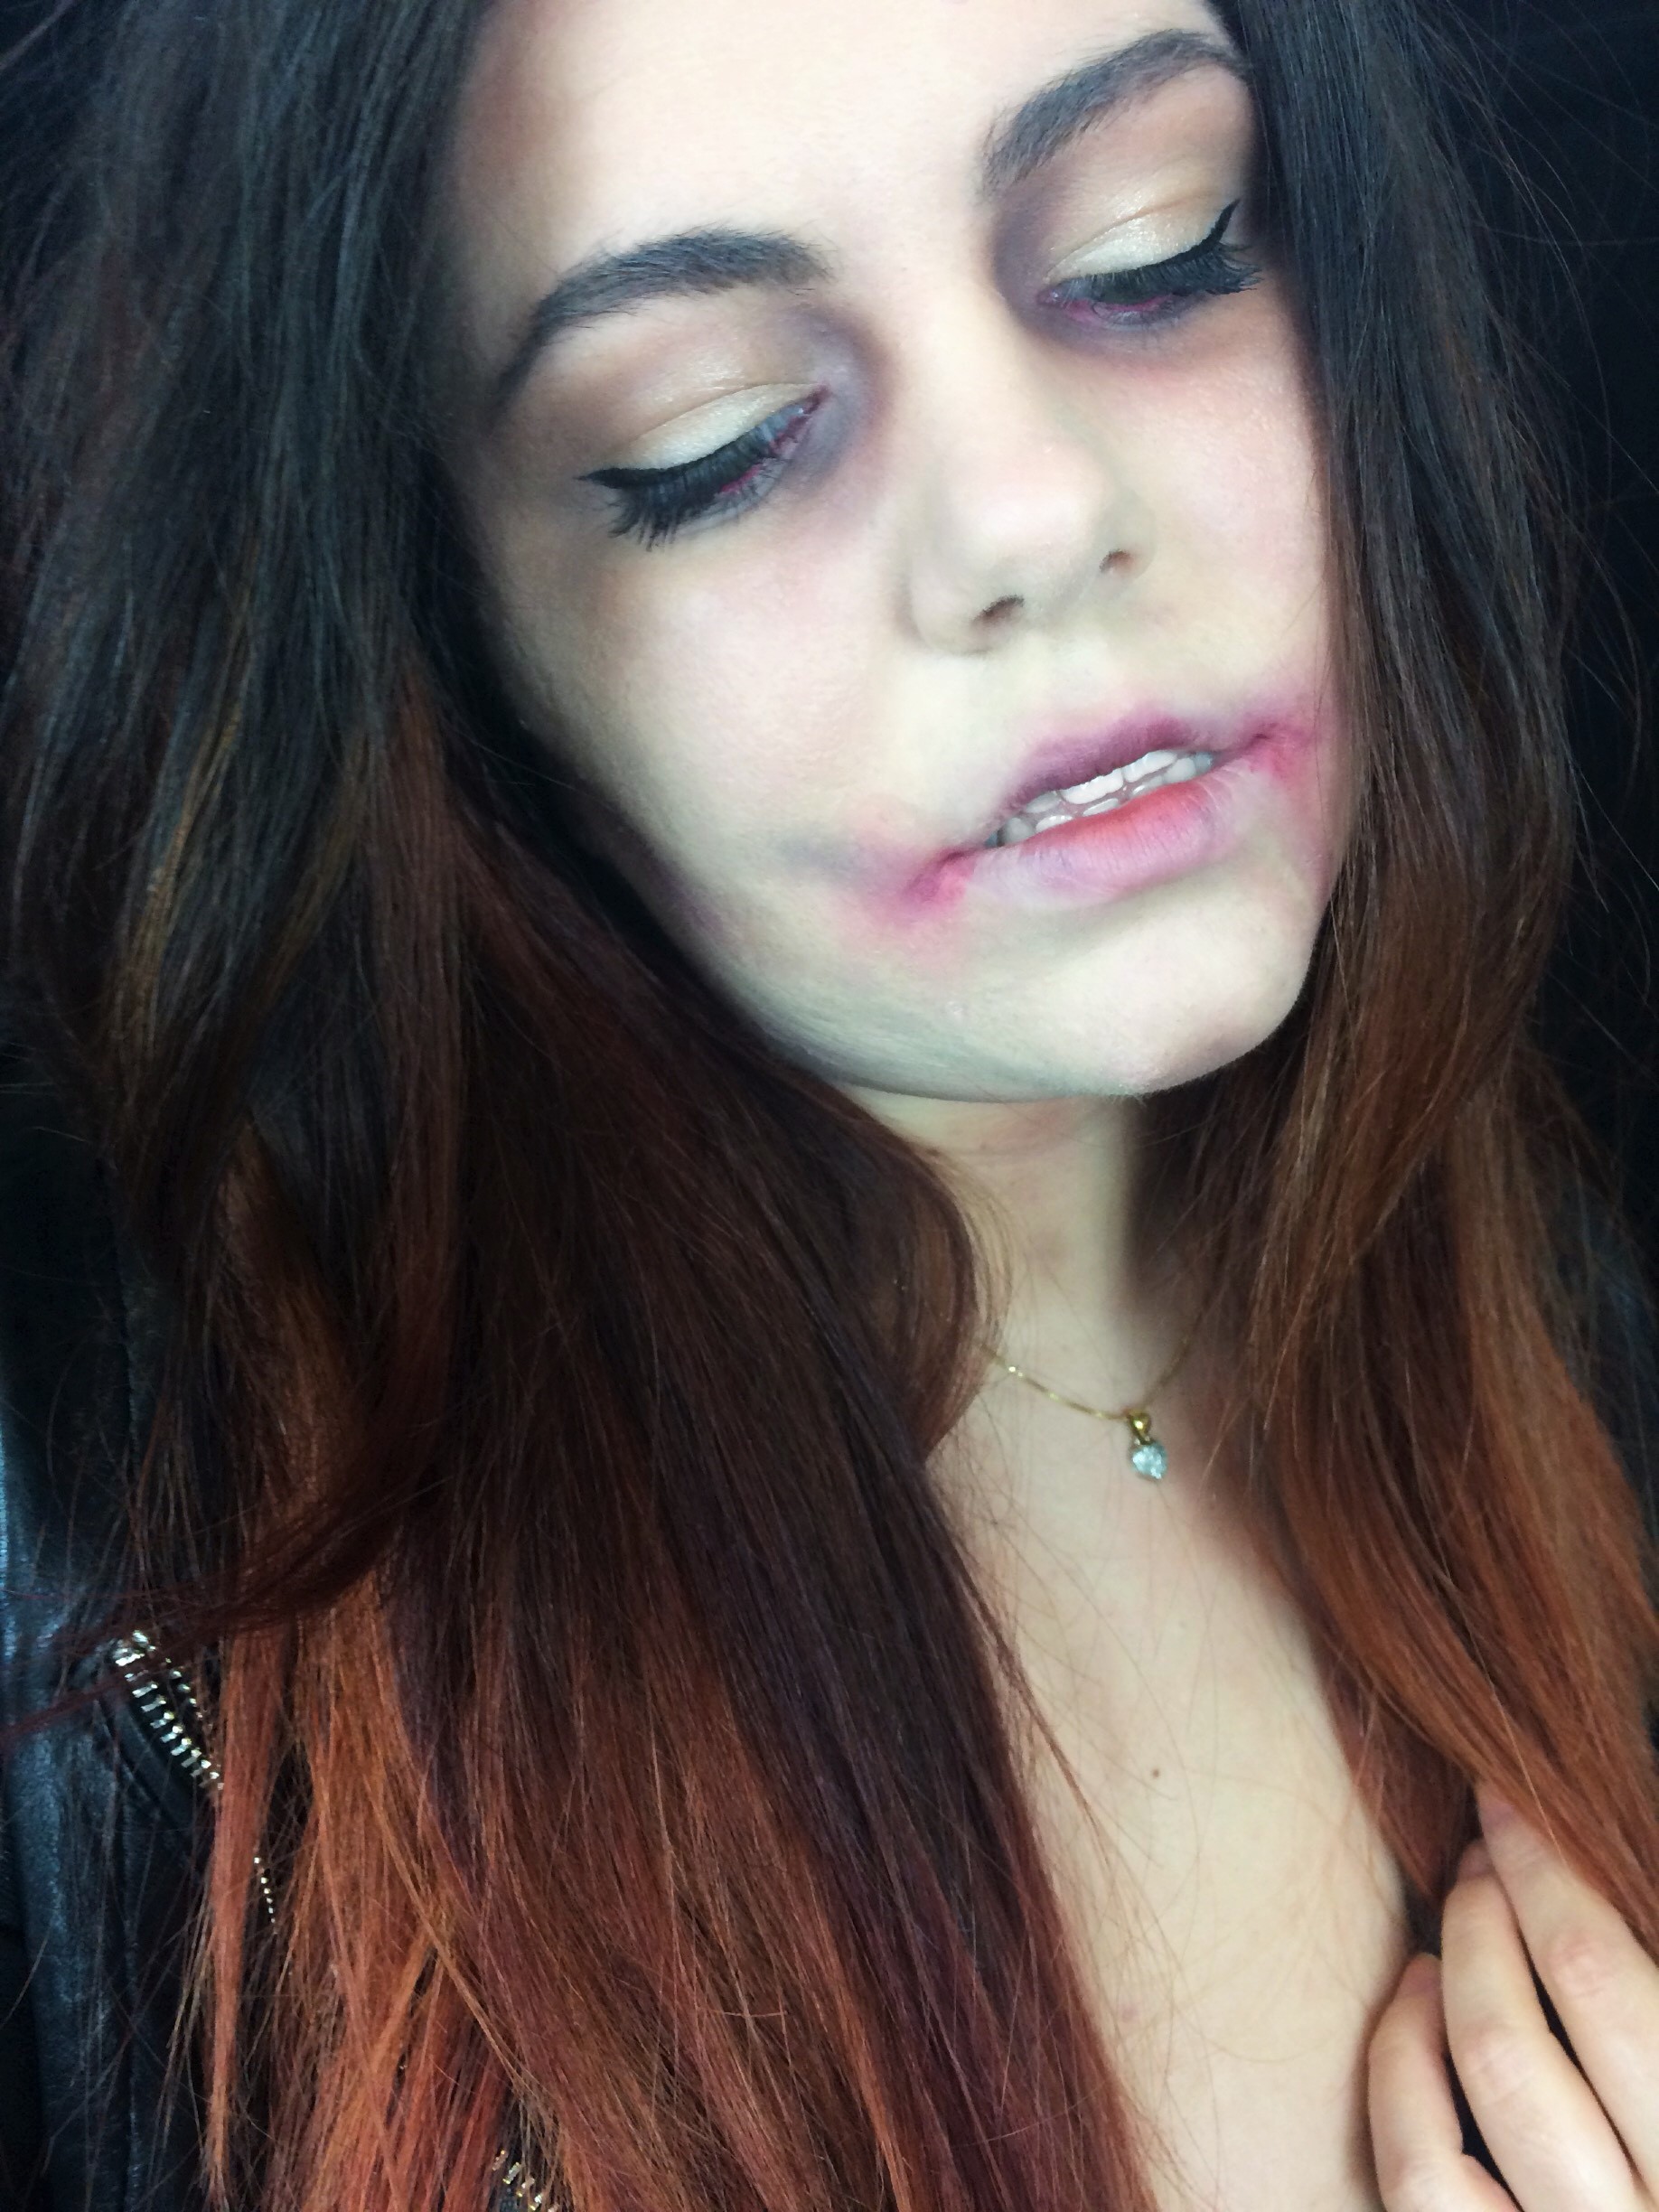 How To Look Dead Zombie Make Up [Click To See How I Got This Look]